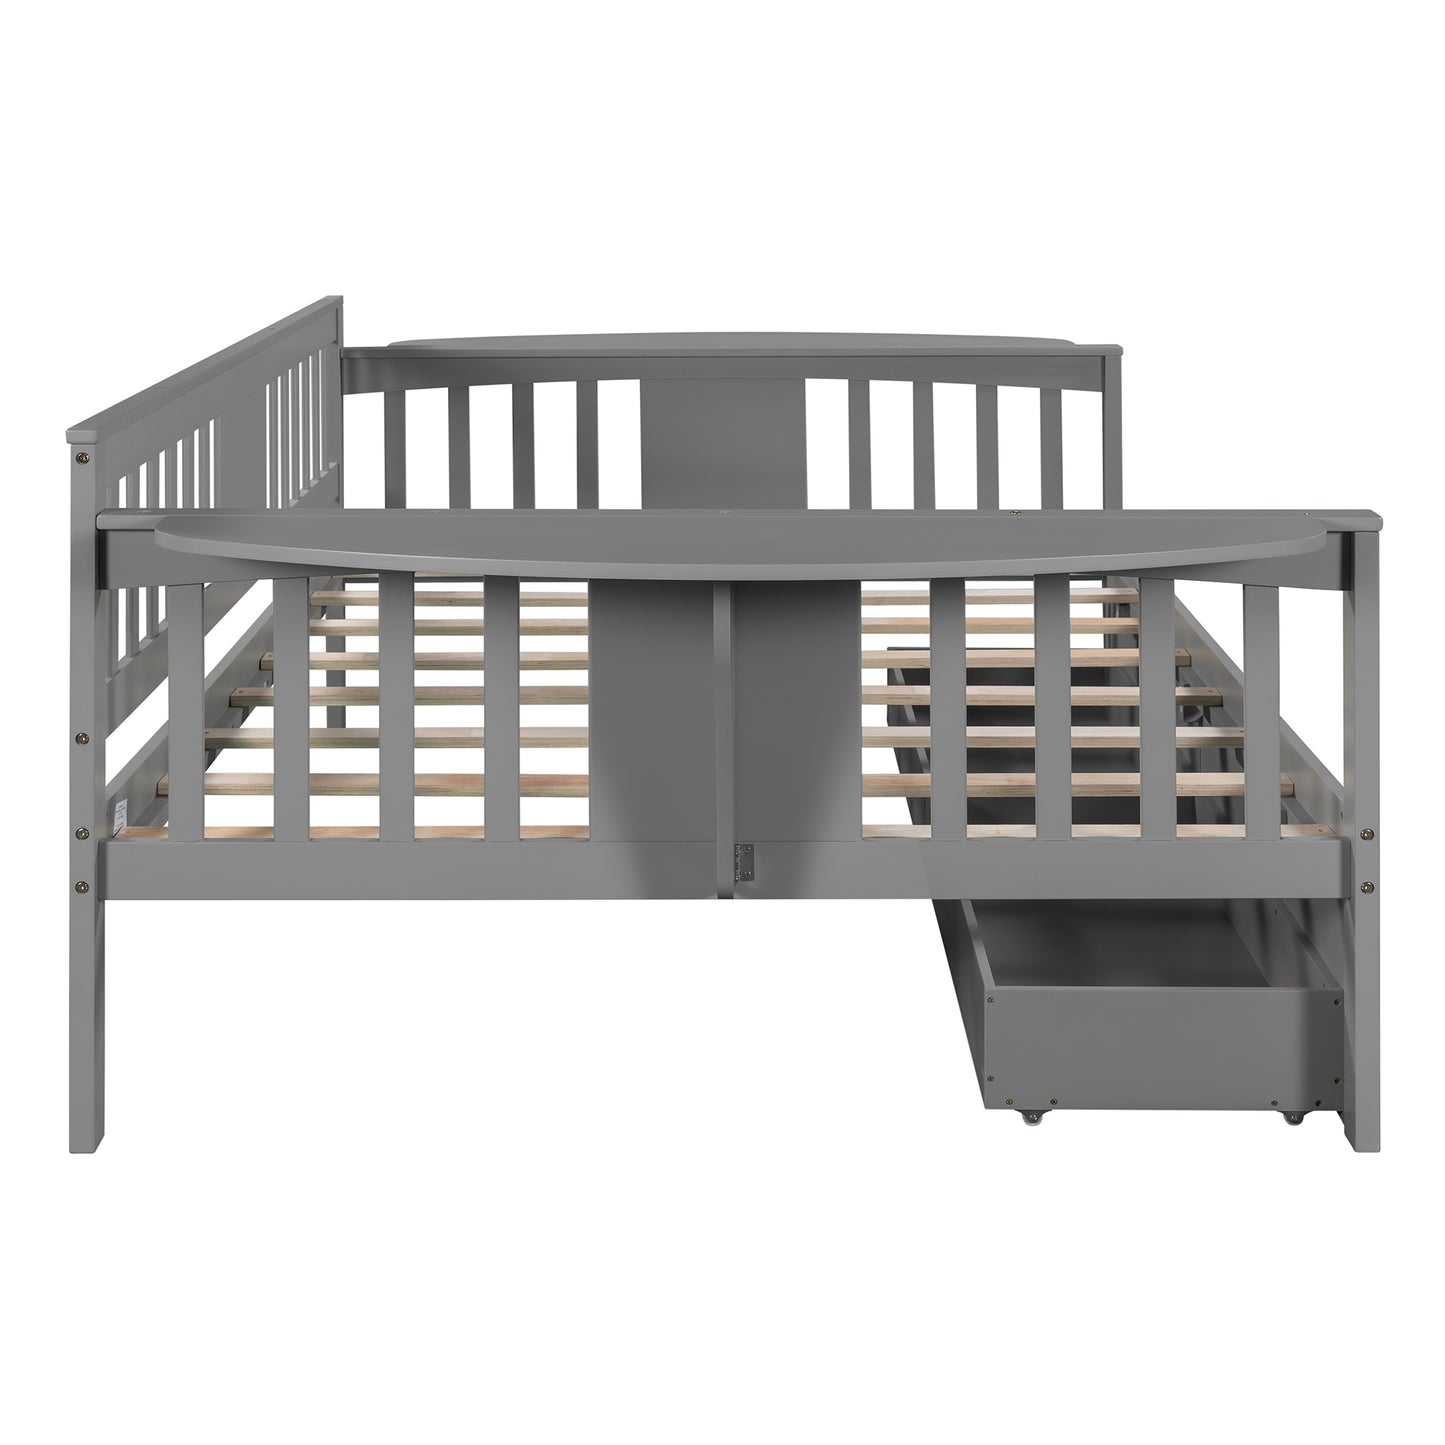 Full-size Gray Daybed with Two Storage Drawers and Collapsible Side-Tables